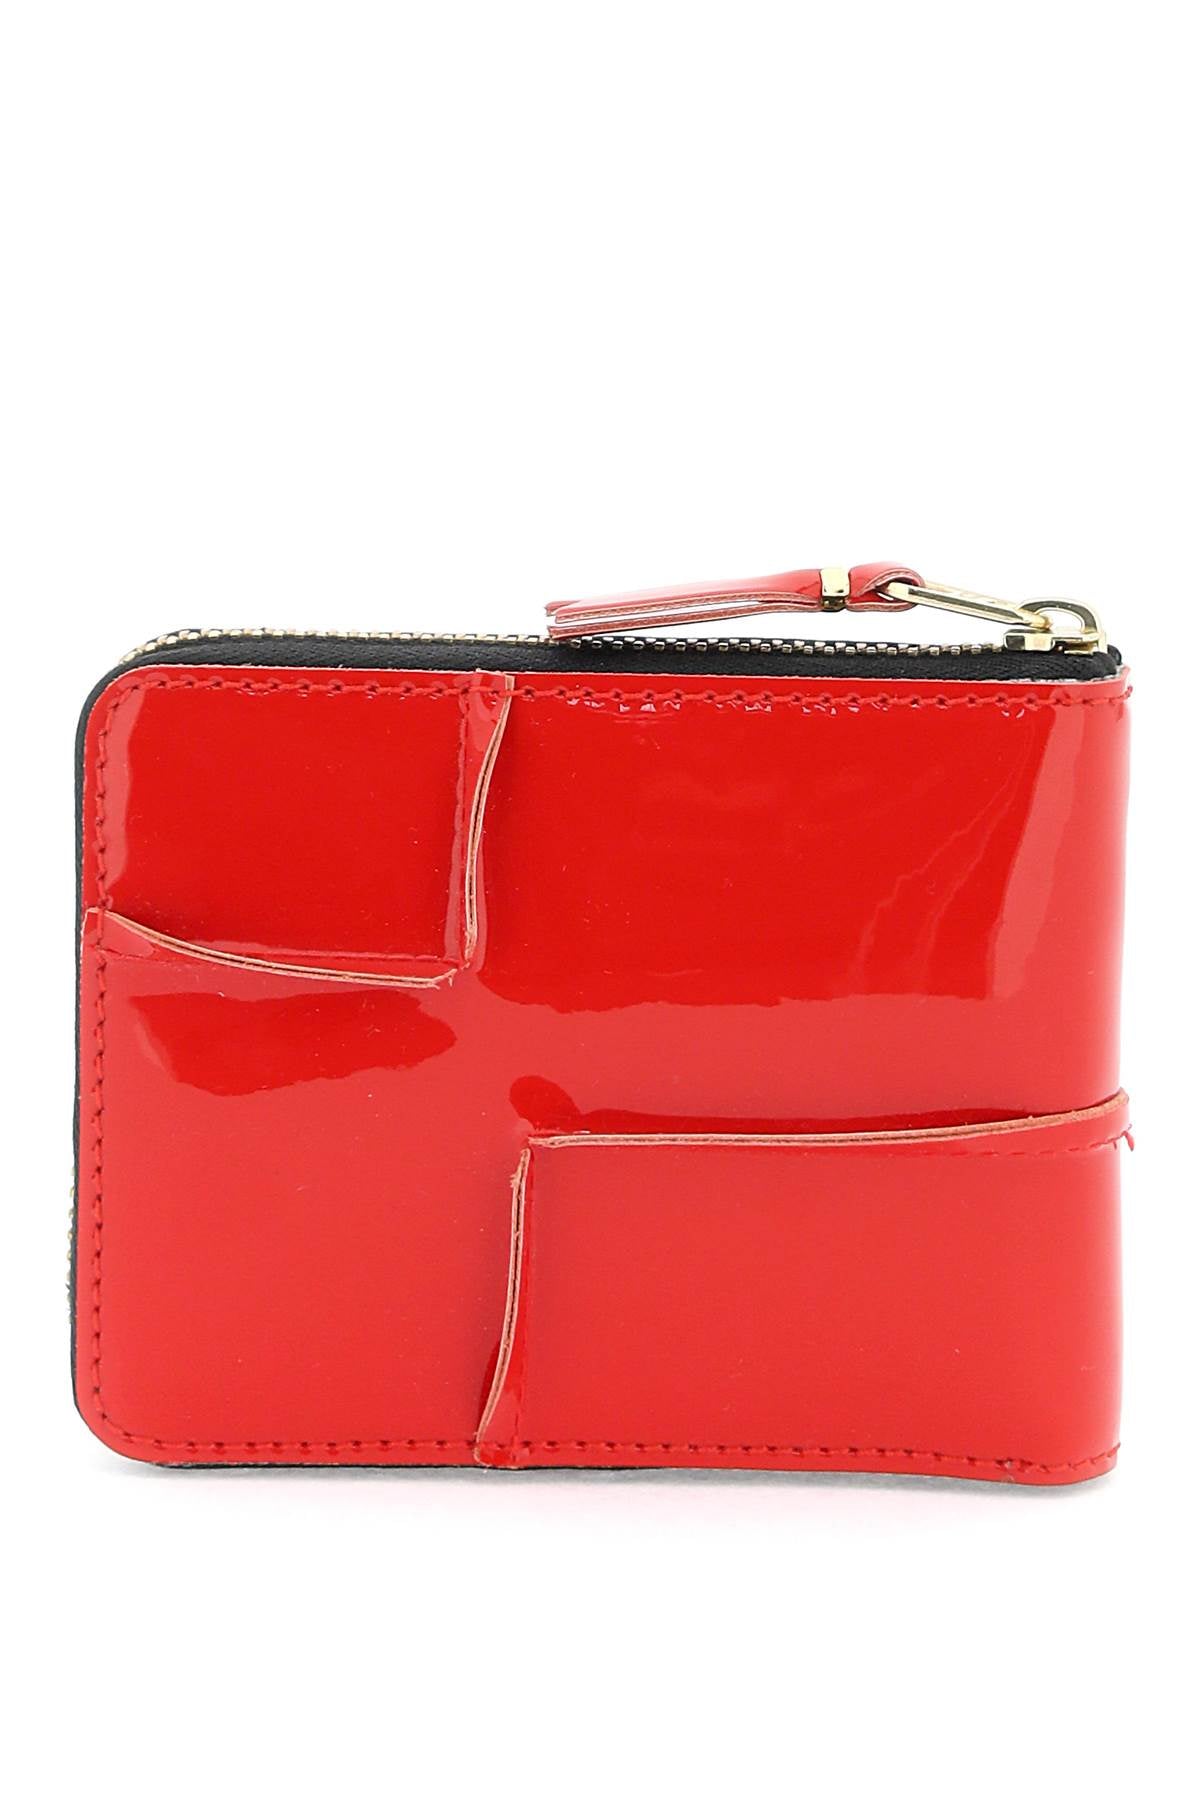 Comme Des Garcons Wallet Zip Around Patent Leather Wallet With Zipper   Red